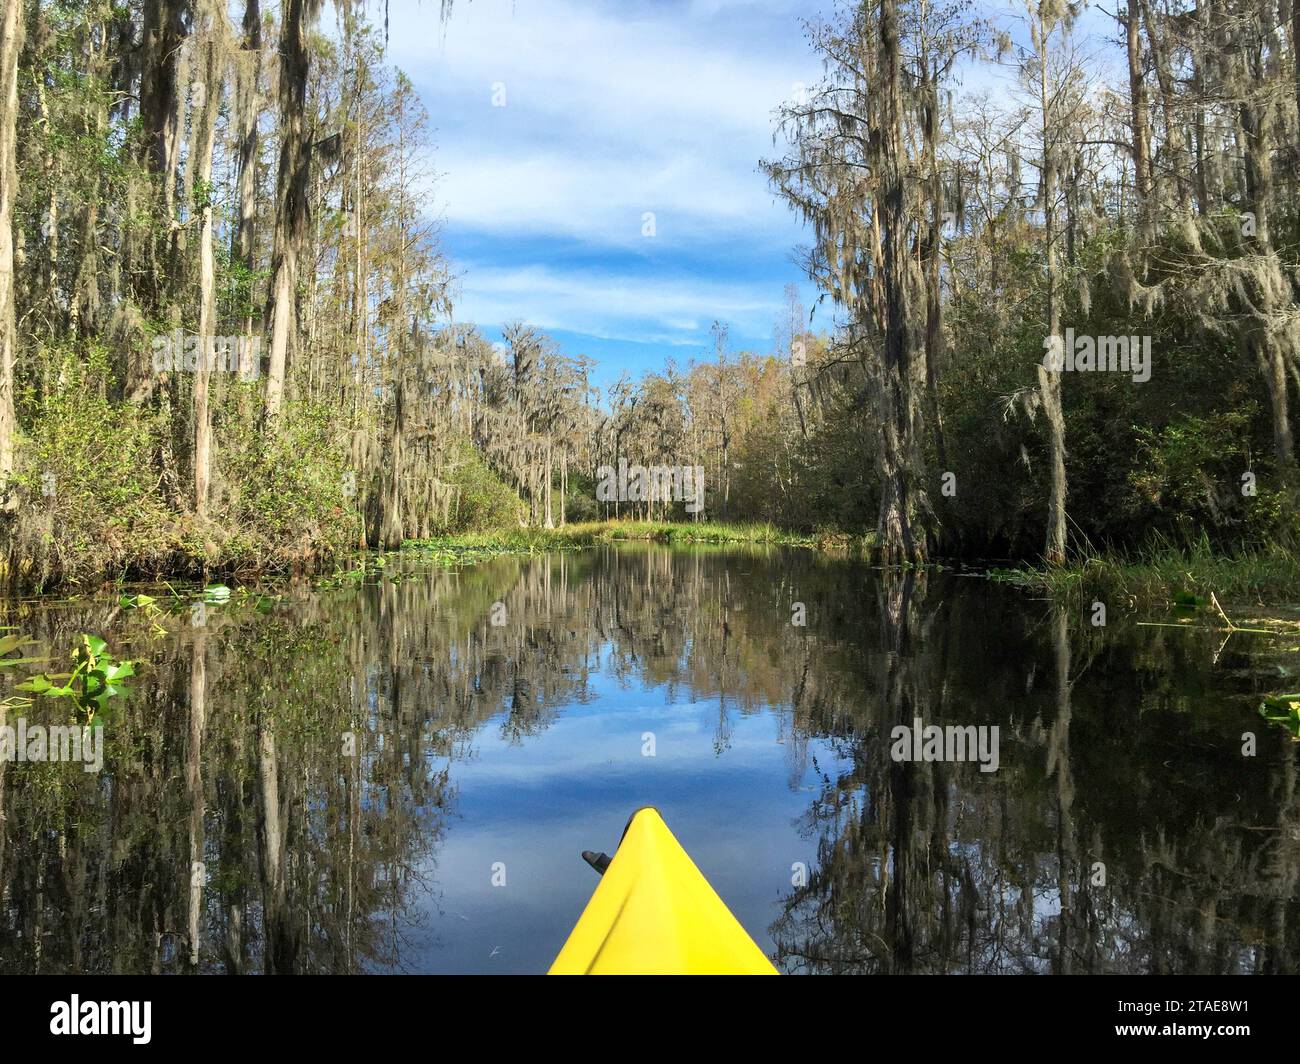 An active senior kayaking in Okefenokee National Wildlife Refuge, North America's largest blackwater swamp habitat and home to diverse wildlife. Stock Photo